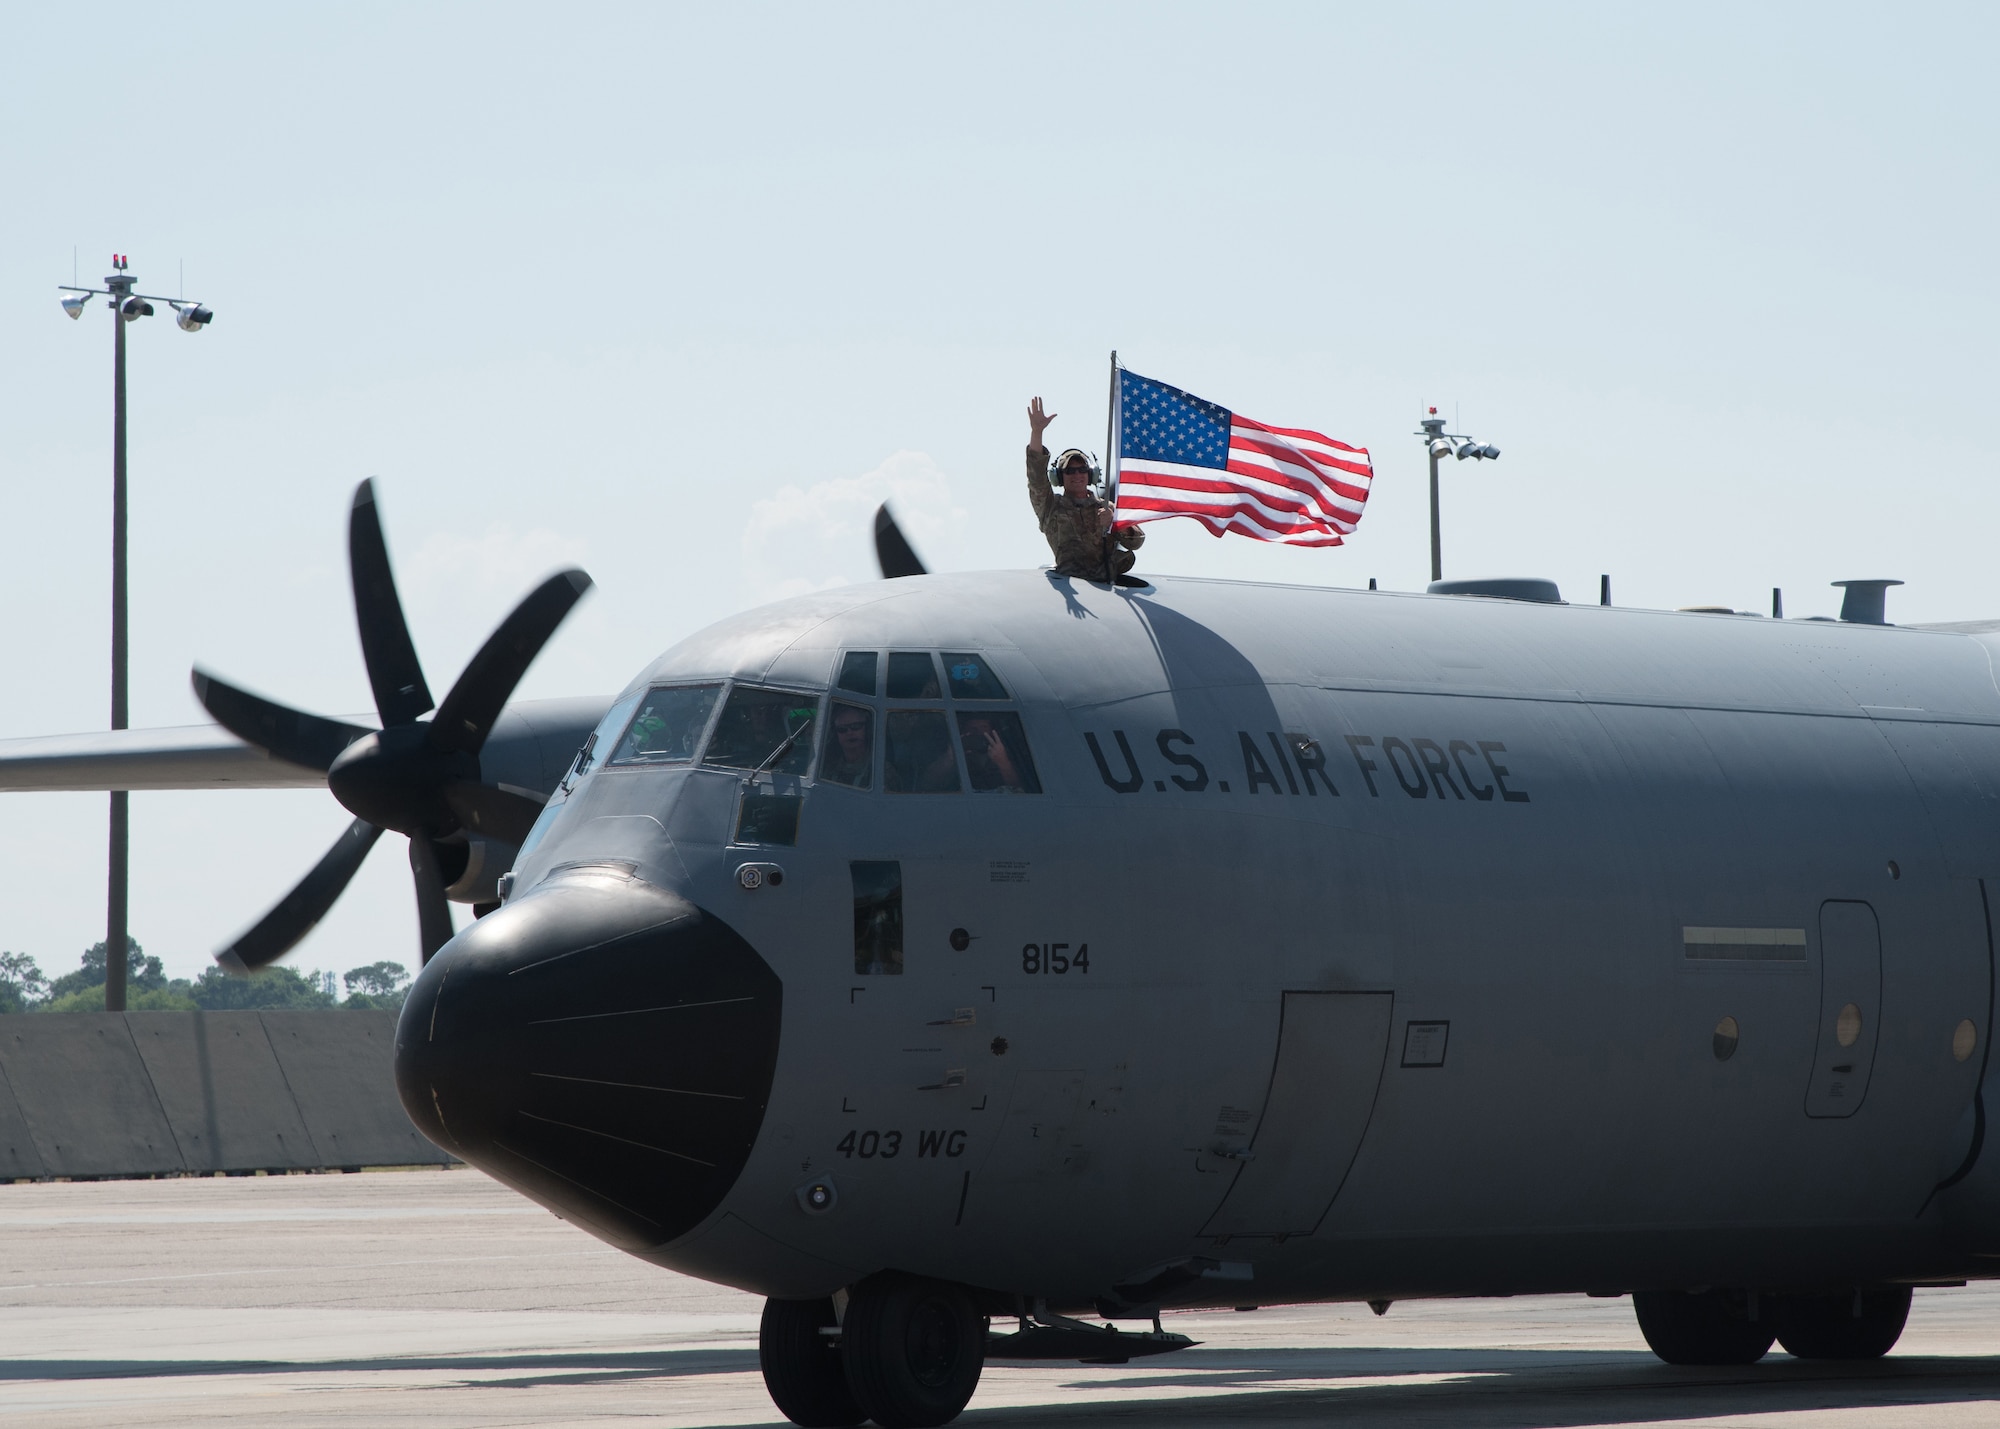 Air Force reservists with the 403rd Wing, Keesler Air Force Base, Mississippi, and C-130J Super Hercules flown by the wing's 815th Airlift Squadron returned from a deployment to Southwest Asia in support of Operations Freedom Sentinel and Inherent Resolve. (U.S. Air Force photo/Maj. Marnee A.C. Losurdo)